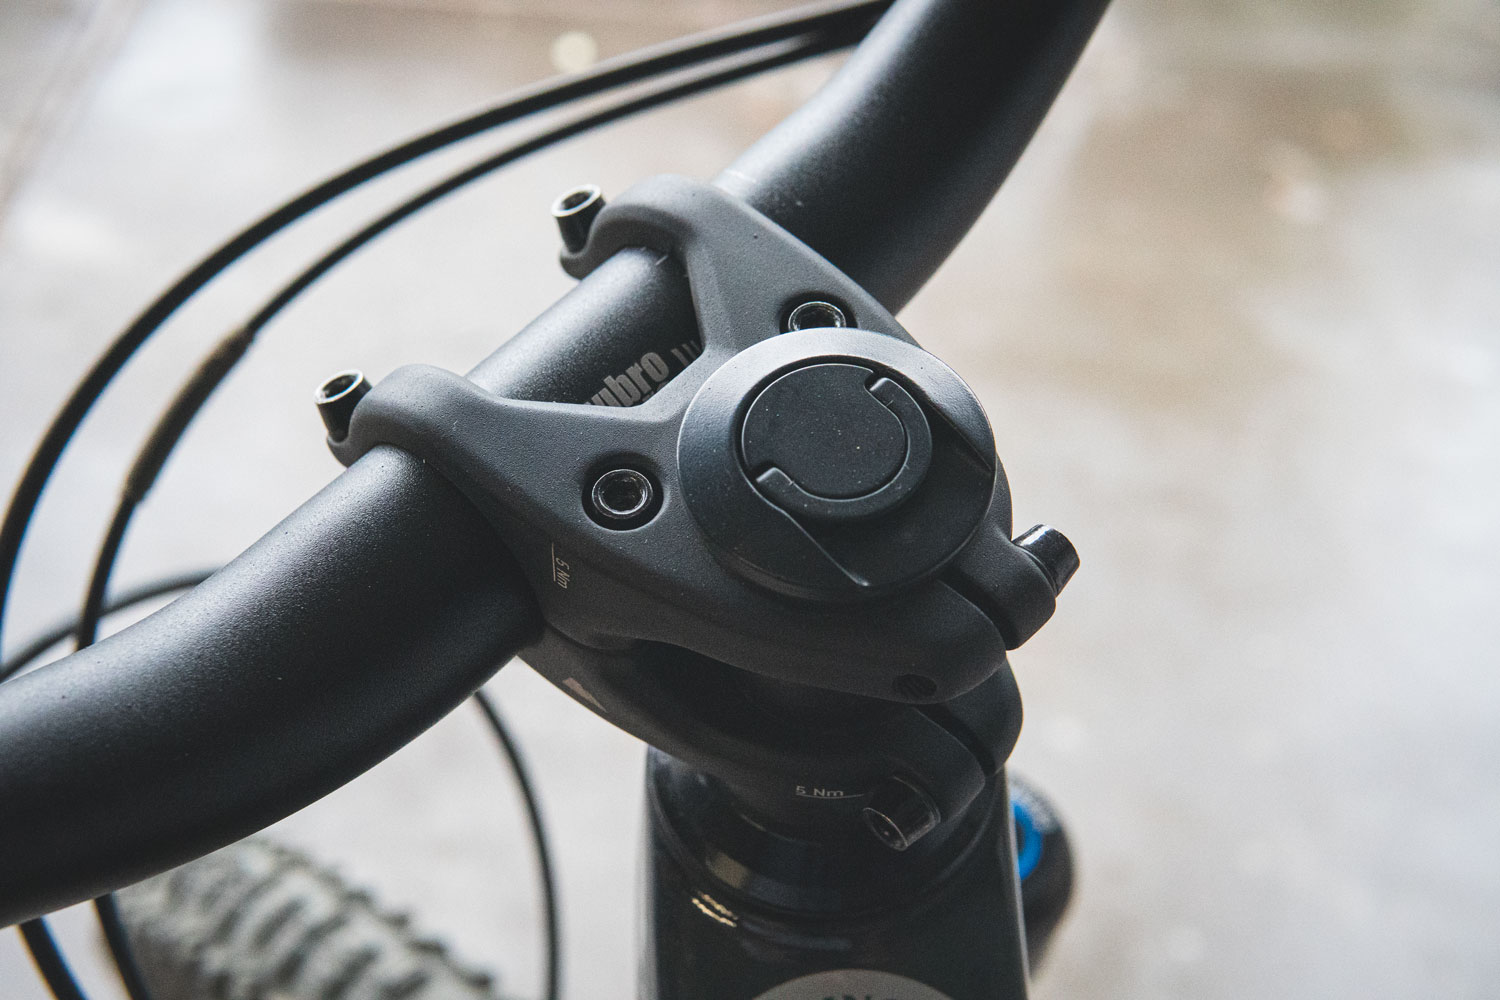 Bontrager BITS Integrated Tool Review